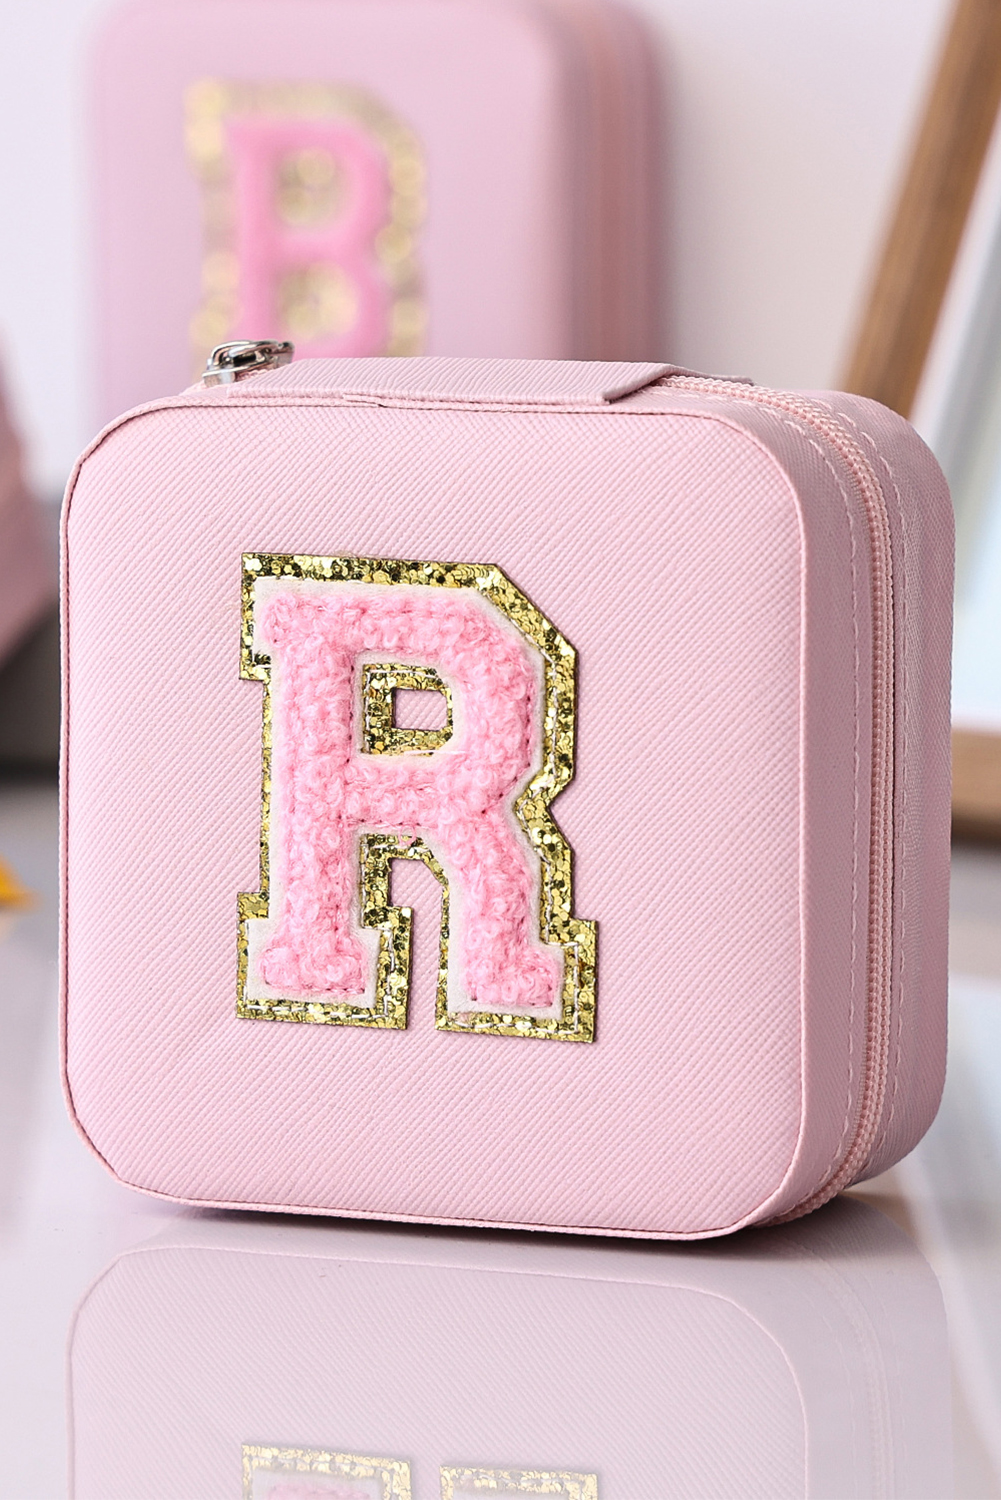 Shewin Wholesale Distributor Pink R Chenille Patch JEWELRY Box with Mirror